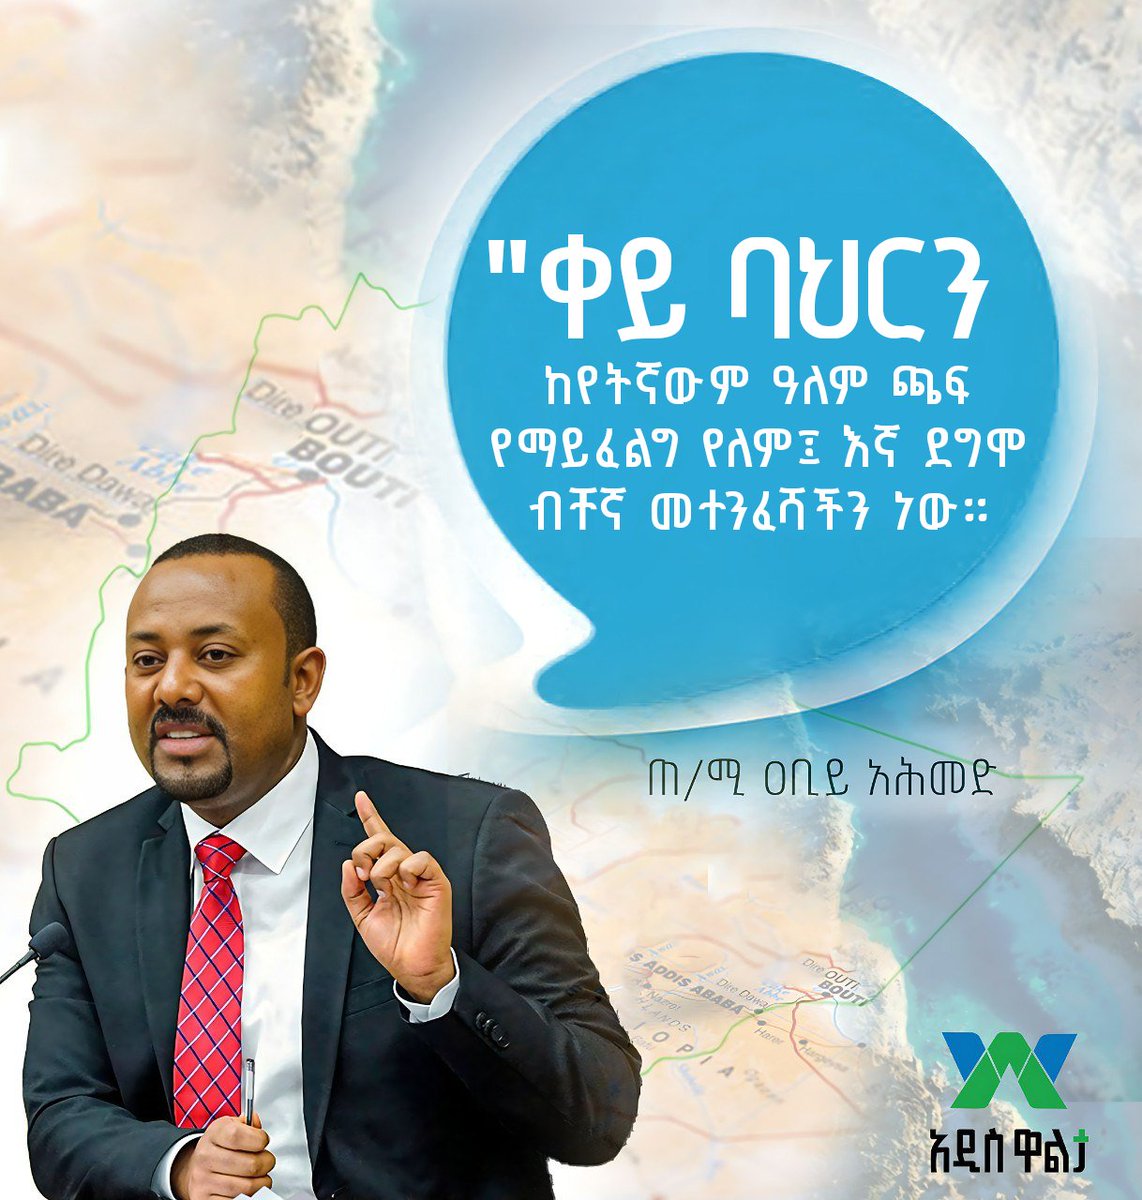 When we demand sea access, it is often taken as a hostile intention towards another country rather than a genuine need for it. Such baseless analyses distance us from the truth - @AbiyAhmedAli #PMAbiyResponds #AbiyAhmed @HassanSMohamud @nytimesworld